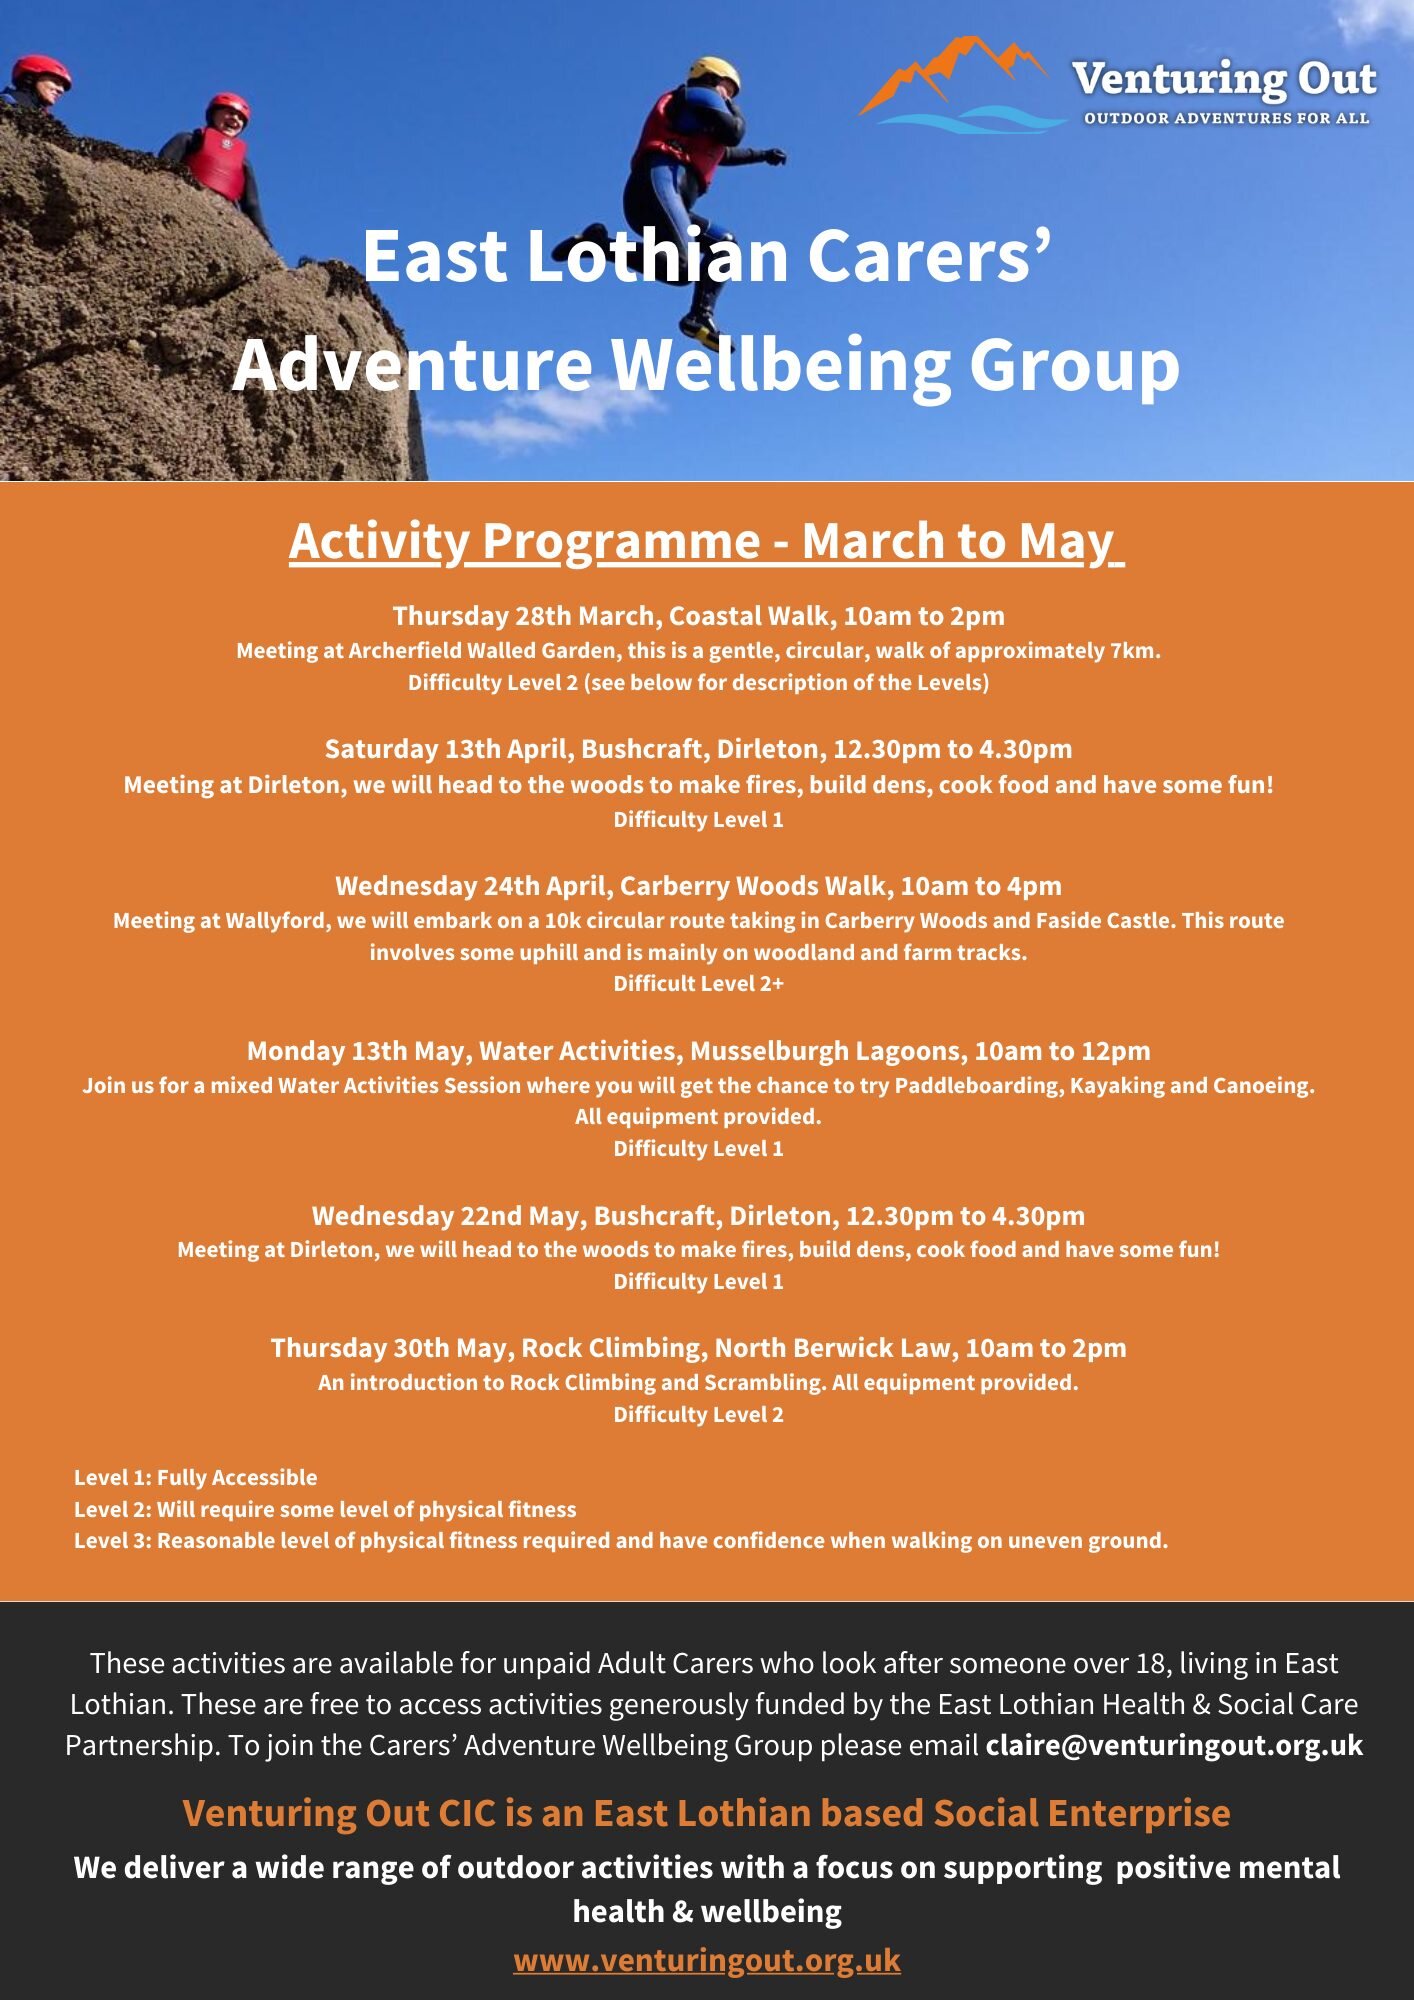 ***FREE Activities for unpaid Adult Carers***

Venturing Out CIC is running a year long programme of adventurous outdoor activities for unpaid Adult Carers who care for someone over the age of 18. The &quot;Lothian Carers' Adventure Wellbeing Group&q